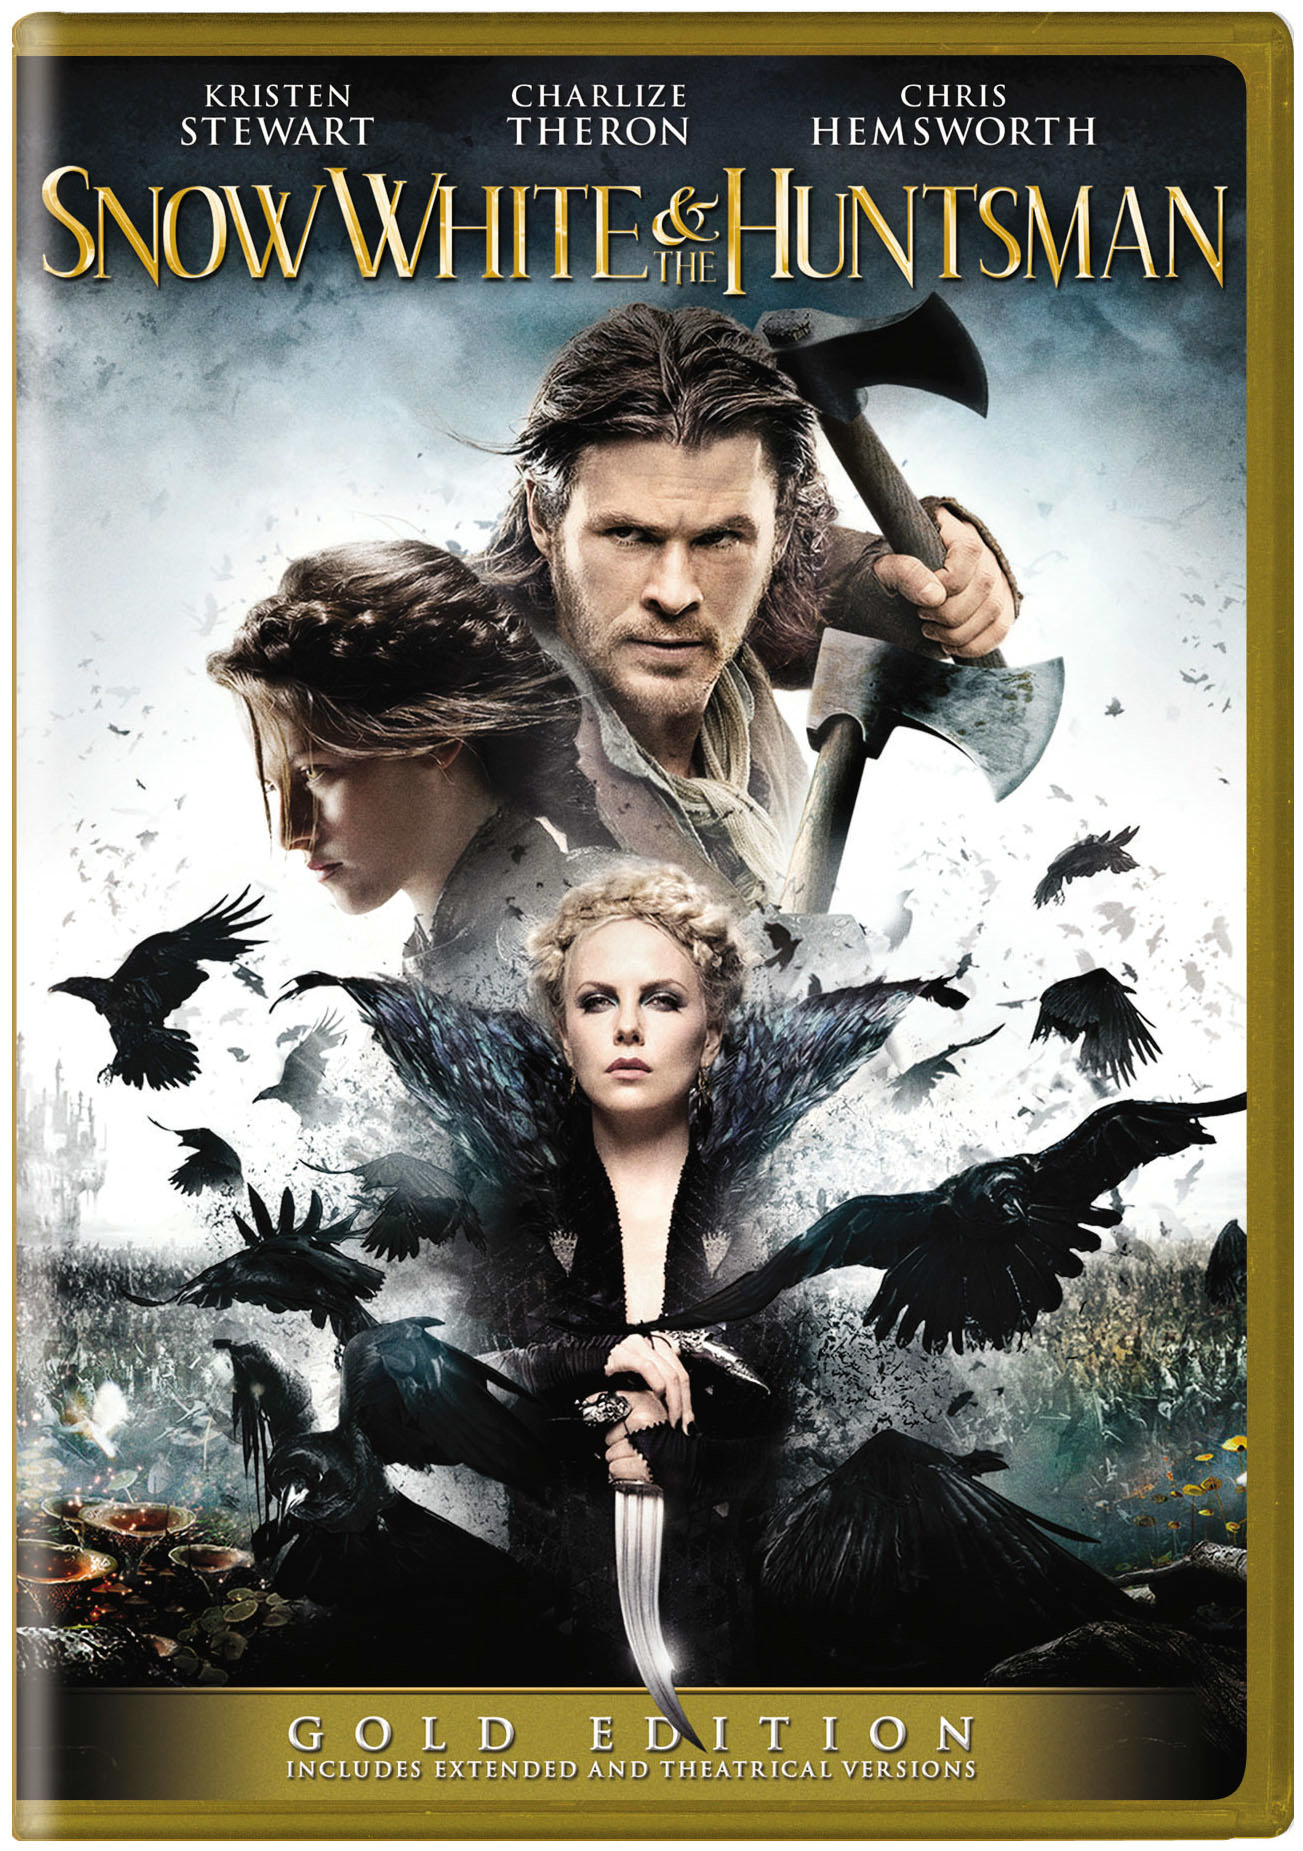 Snow White And The Huntsman (Gold Edition) - DVD [ 2012 ]  - Adventure Movies On DVD - Movies On GRUV